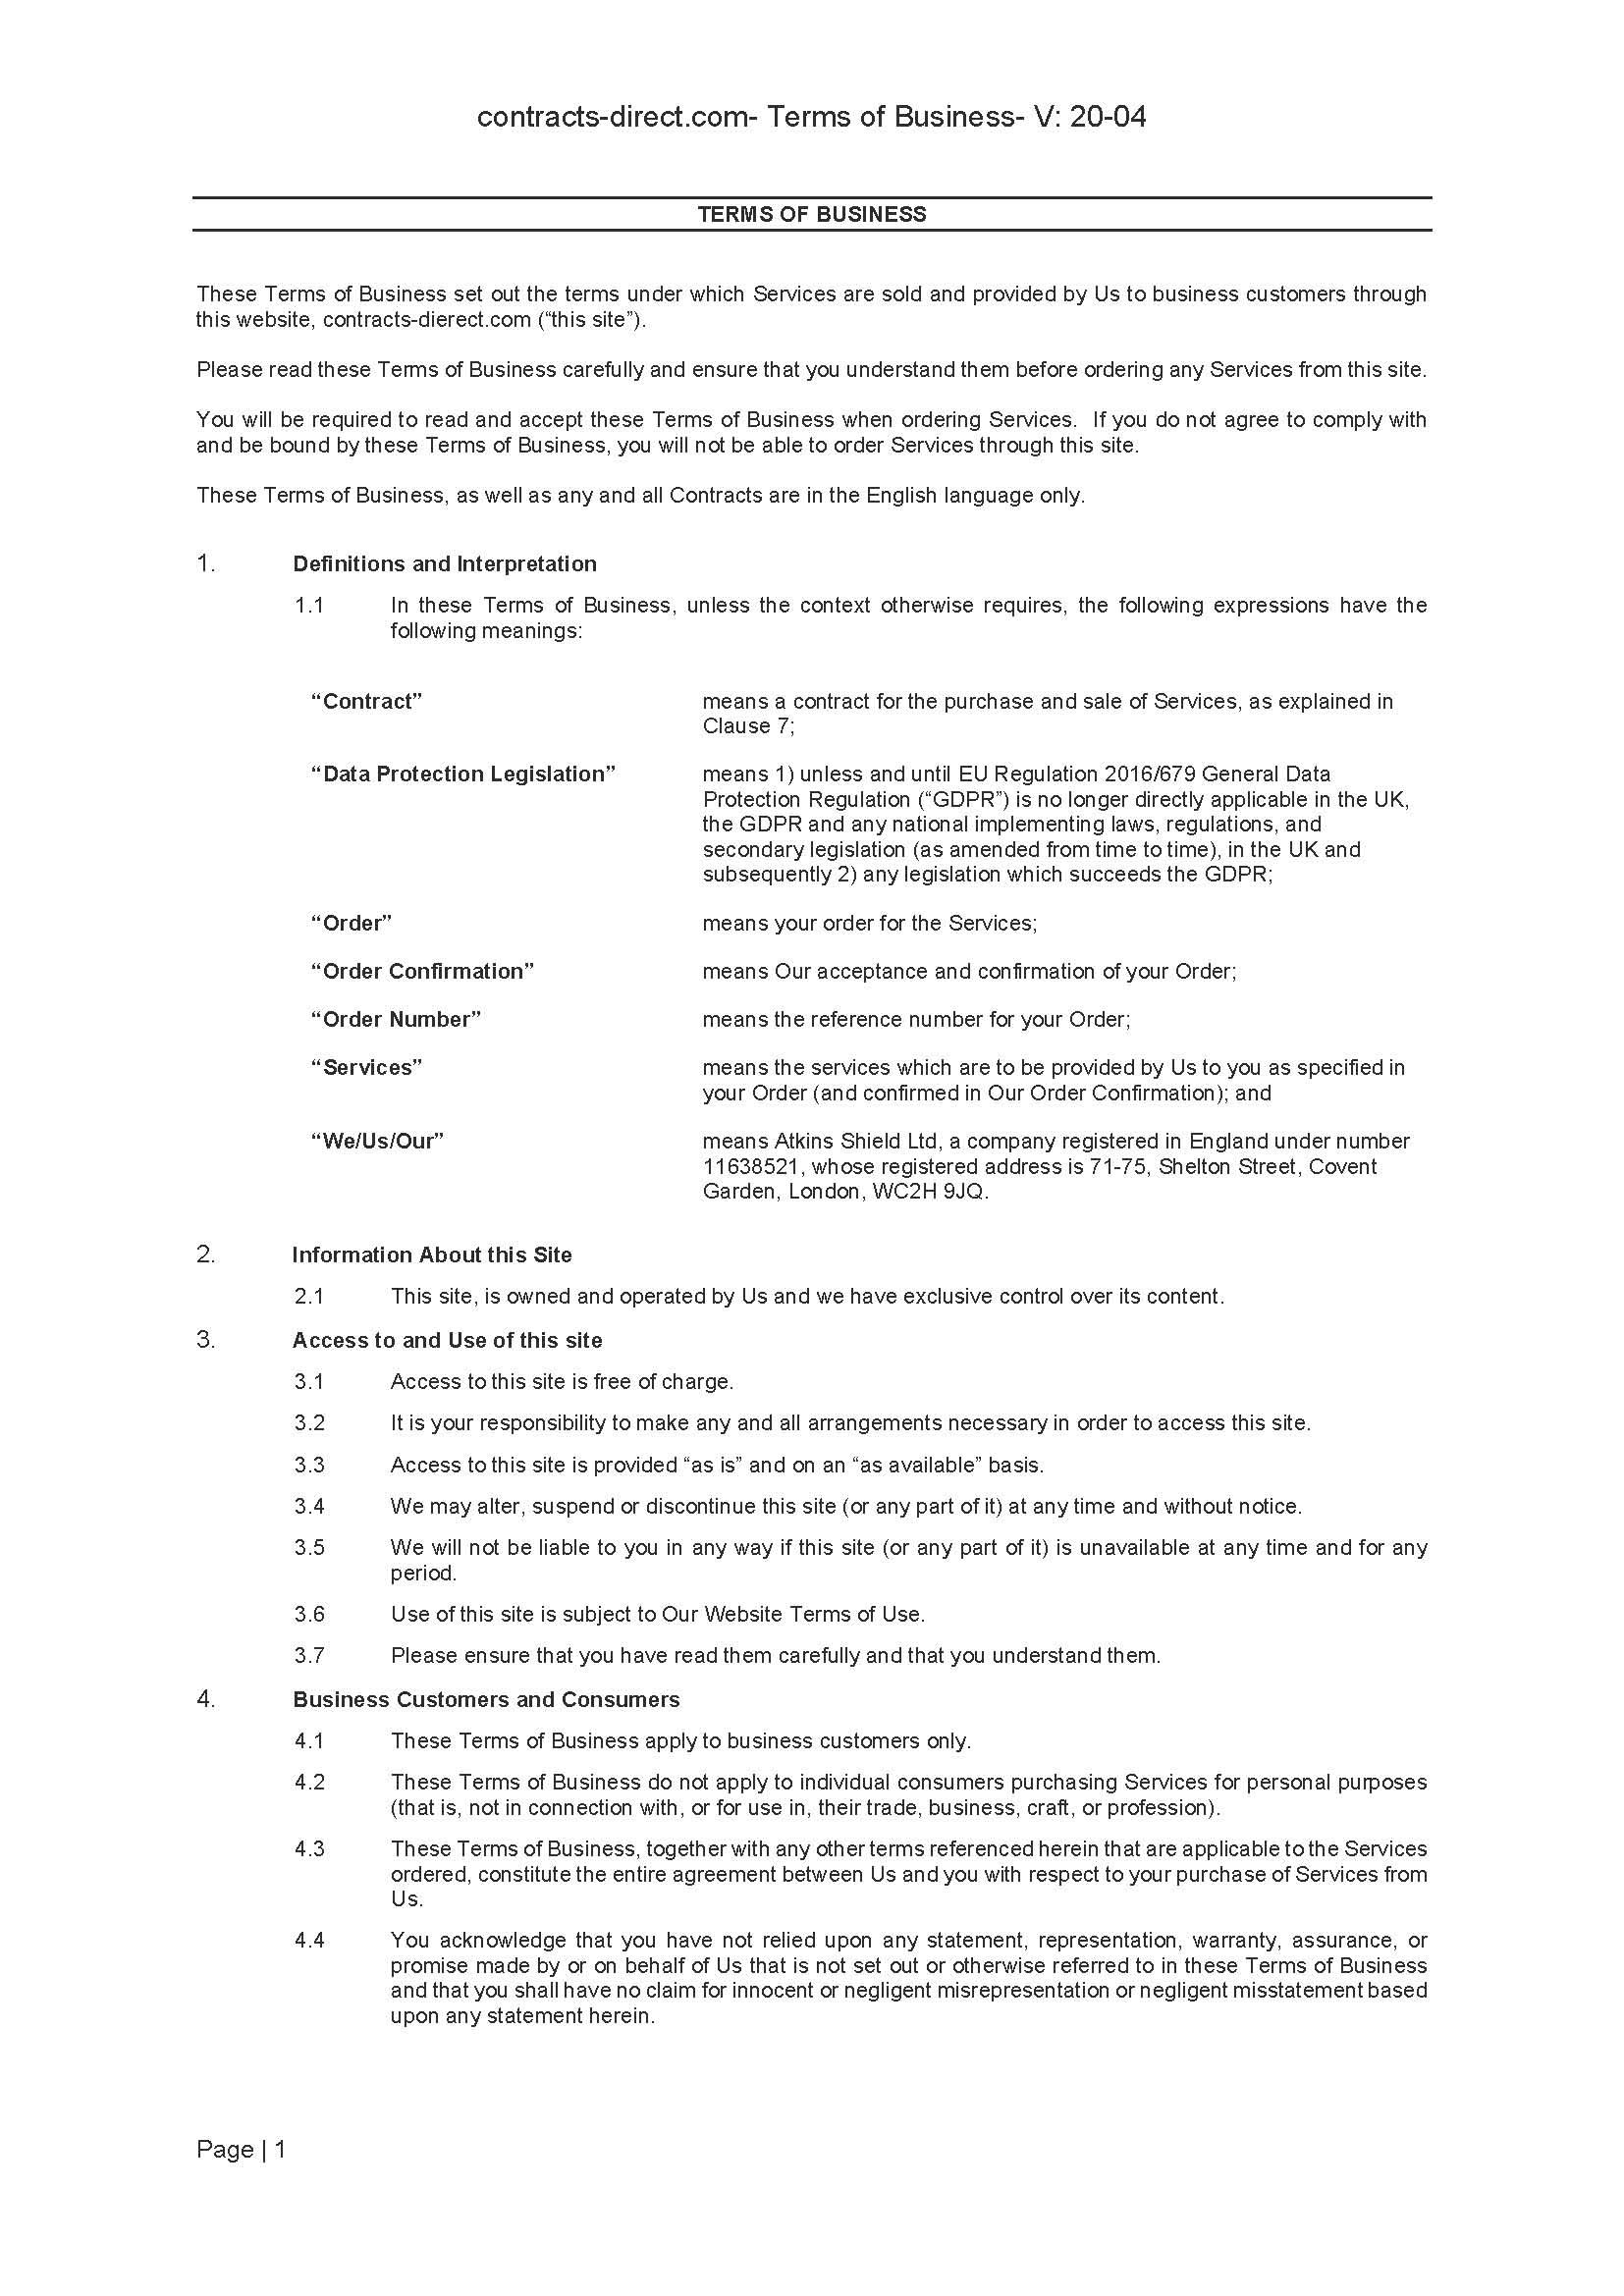 business contract terms (assignment of receivables) regulations